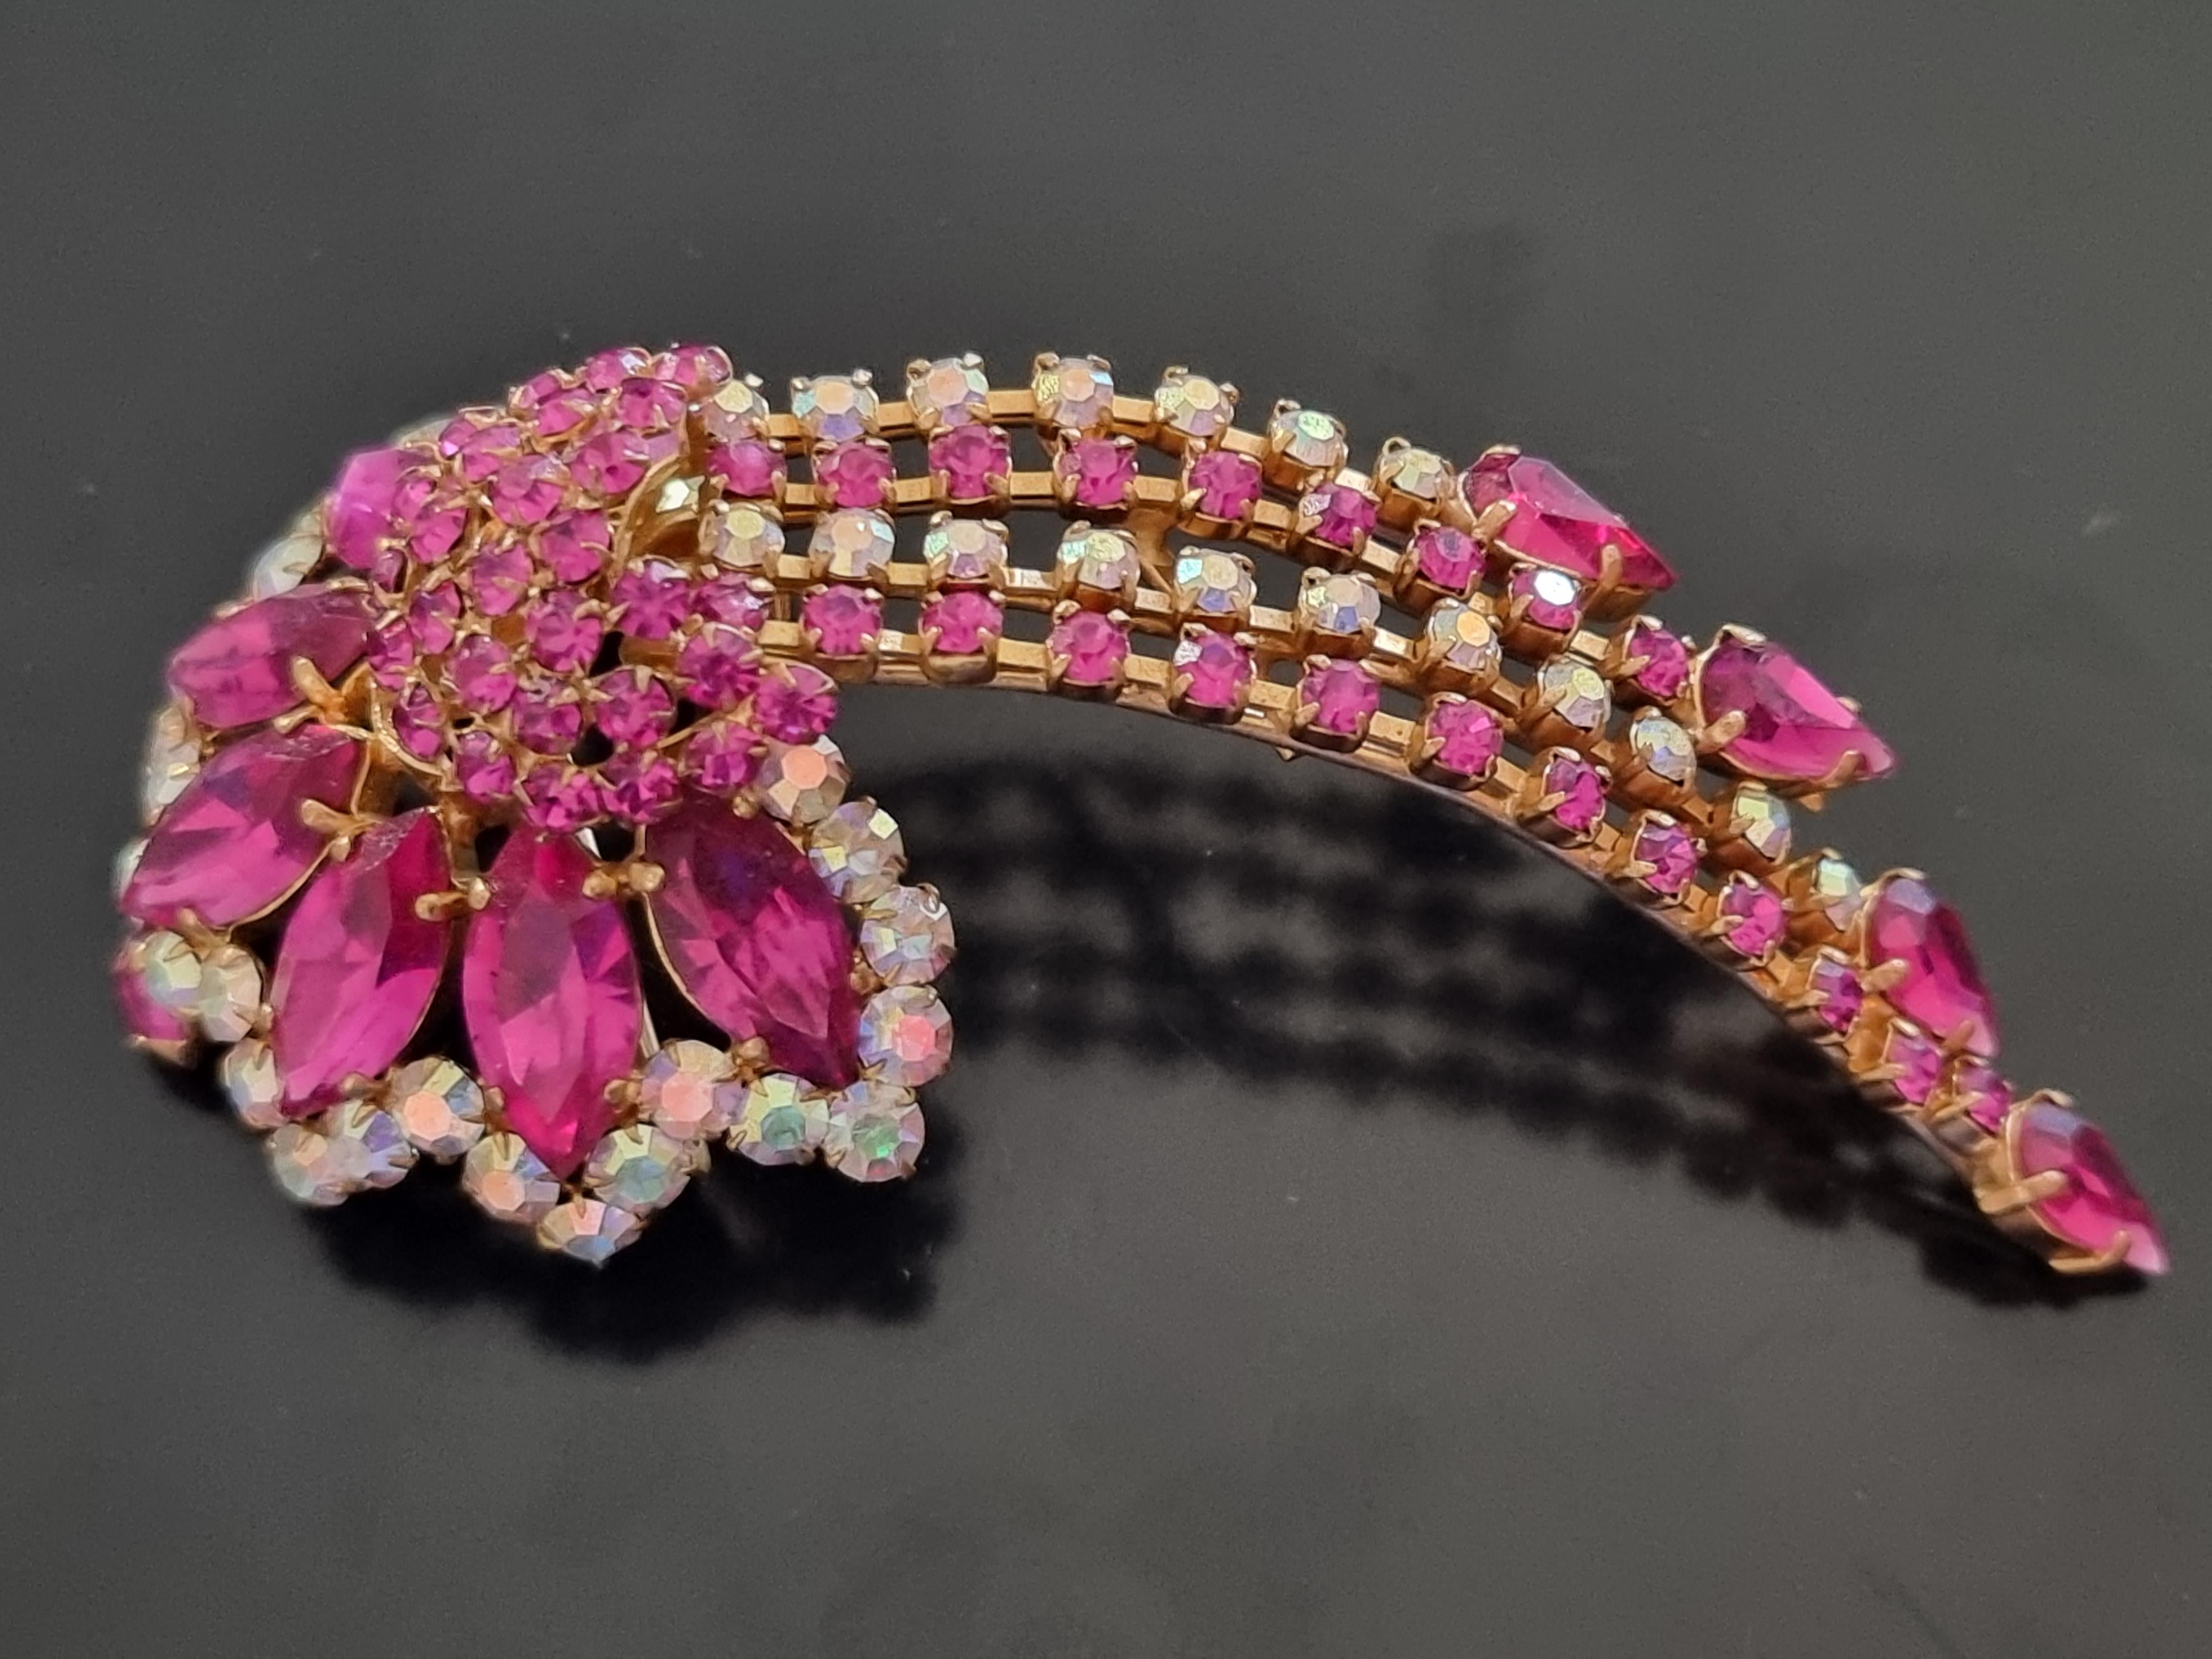 Magnificent large old brooch,
vintage 30s - 40s,
gold metal, glass rhinestones,
by Haute Couture designer ROGER Jean Pierre, probably for Elsa SCHIAPARELLI,
dimensions 9 x 4 cm, weight 24 g,
inscription 